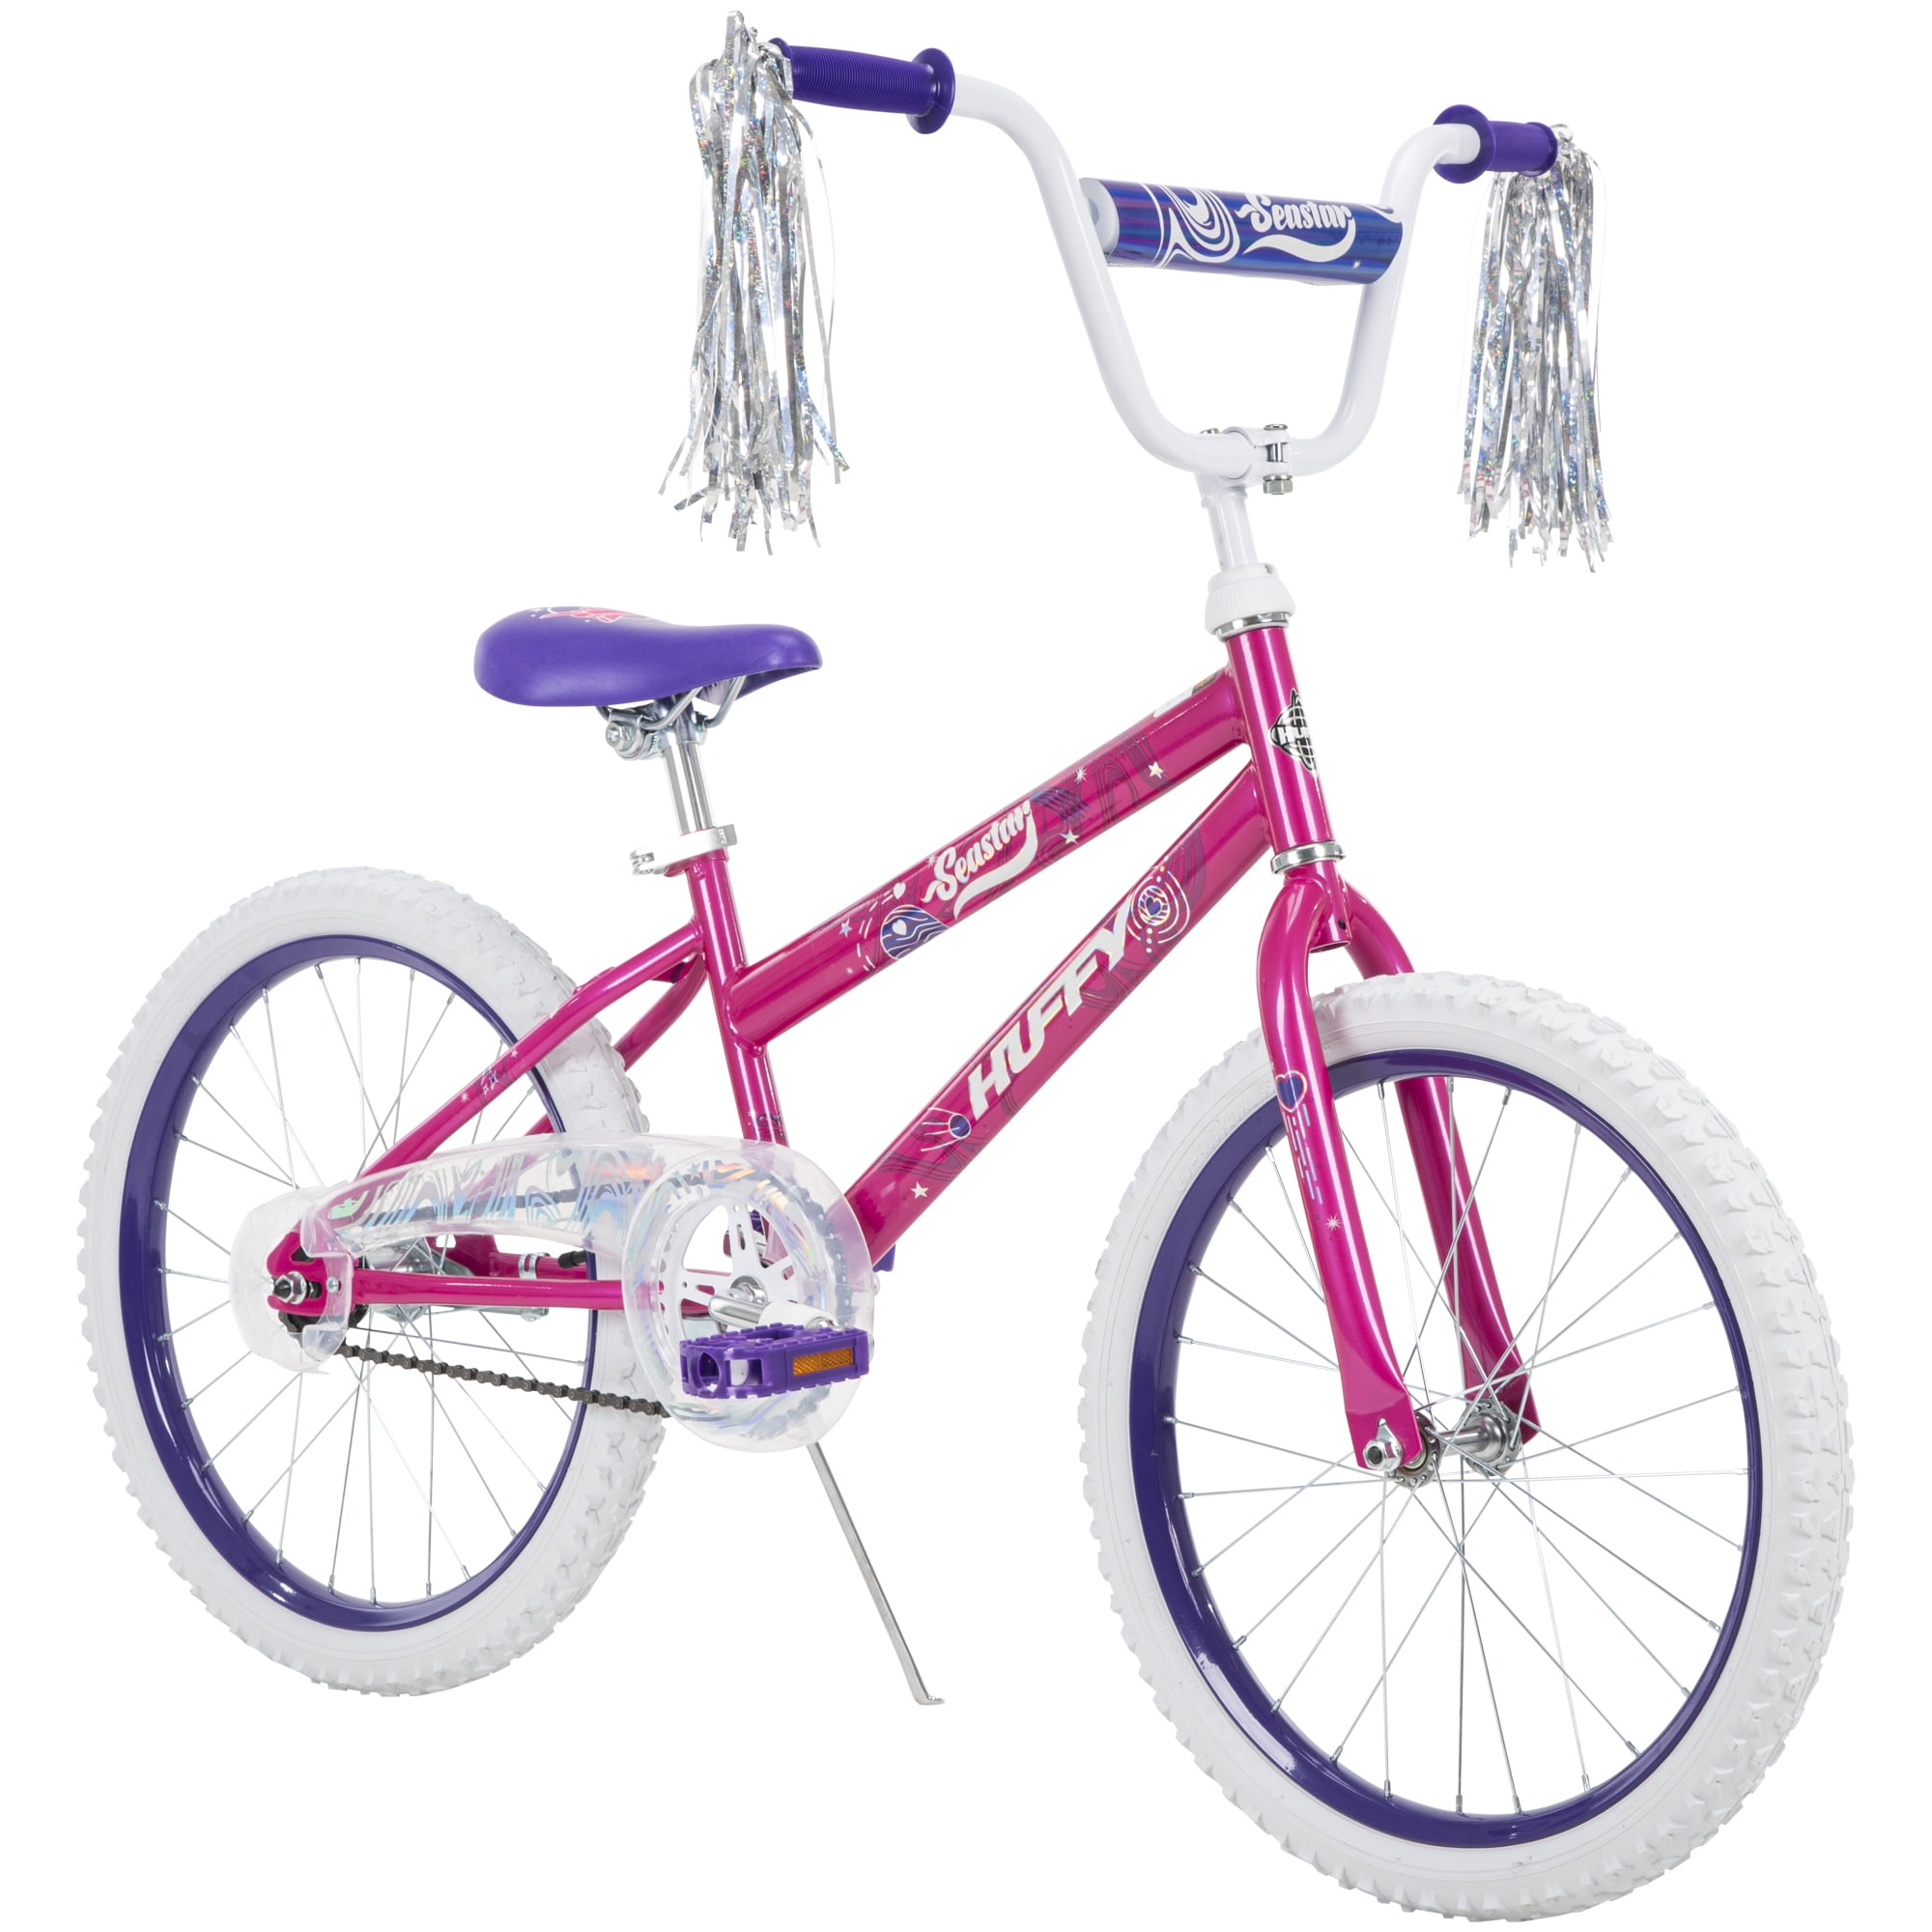 Kids Girl Bike 5 to 9 Yrs Old Sea Star Huffy 20 in Outdoor Play Fun Blue Pink for sale online 